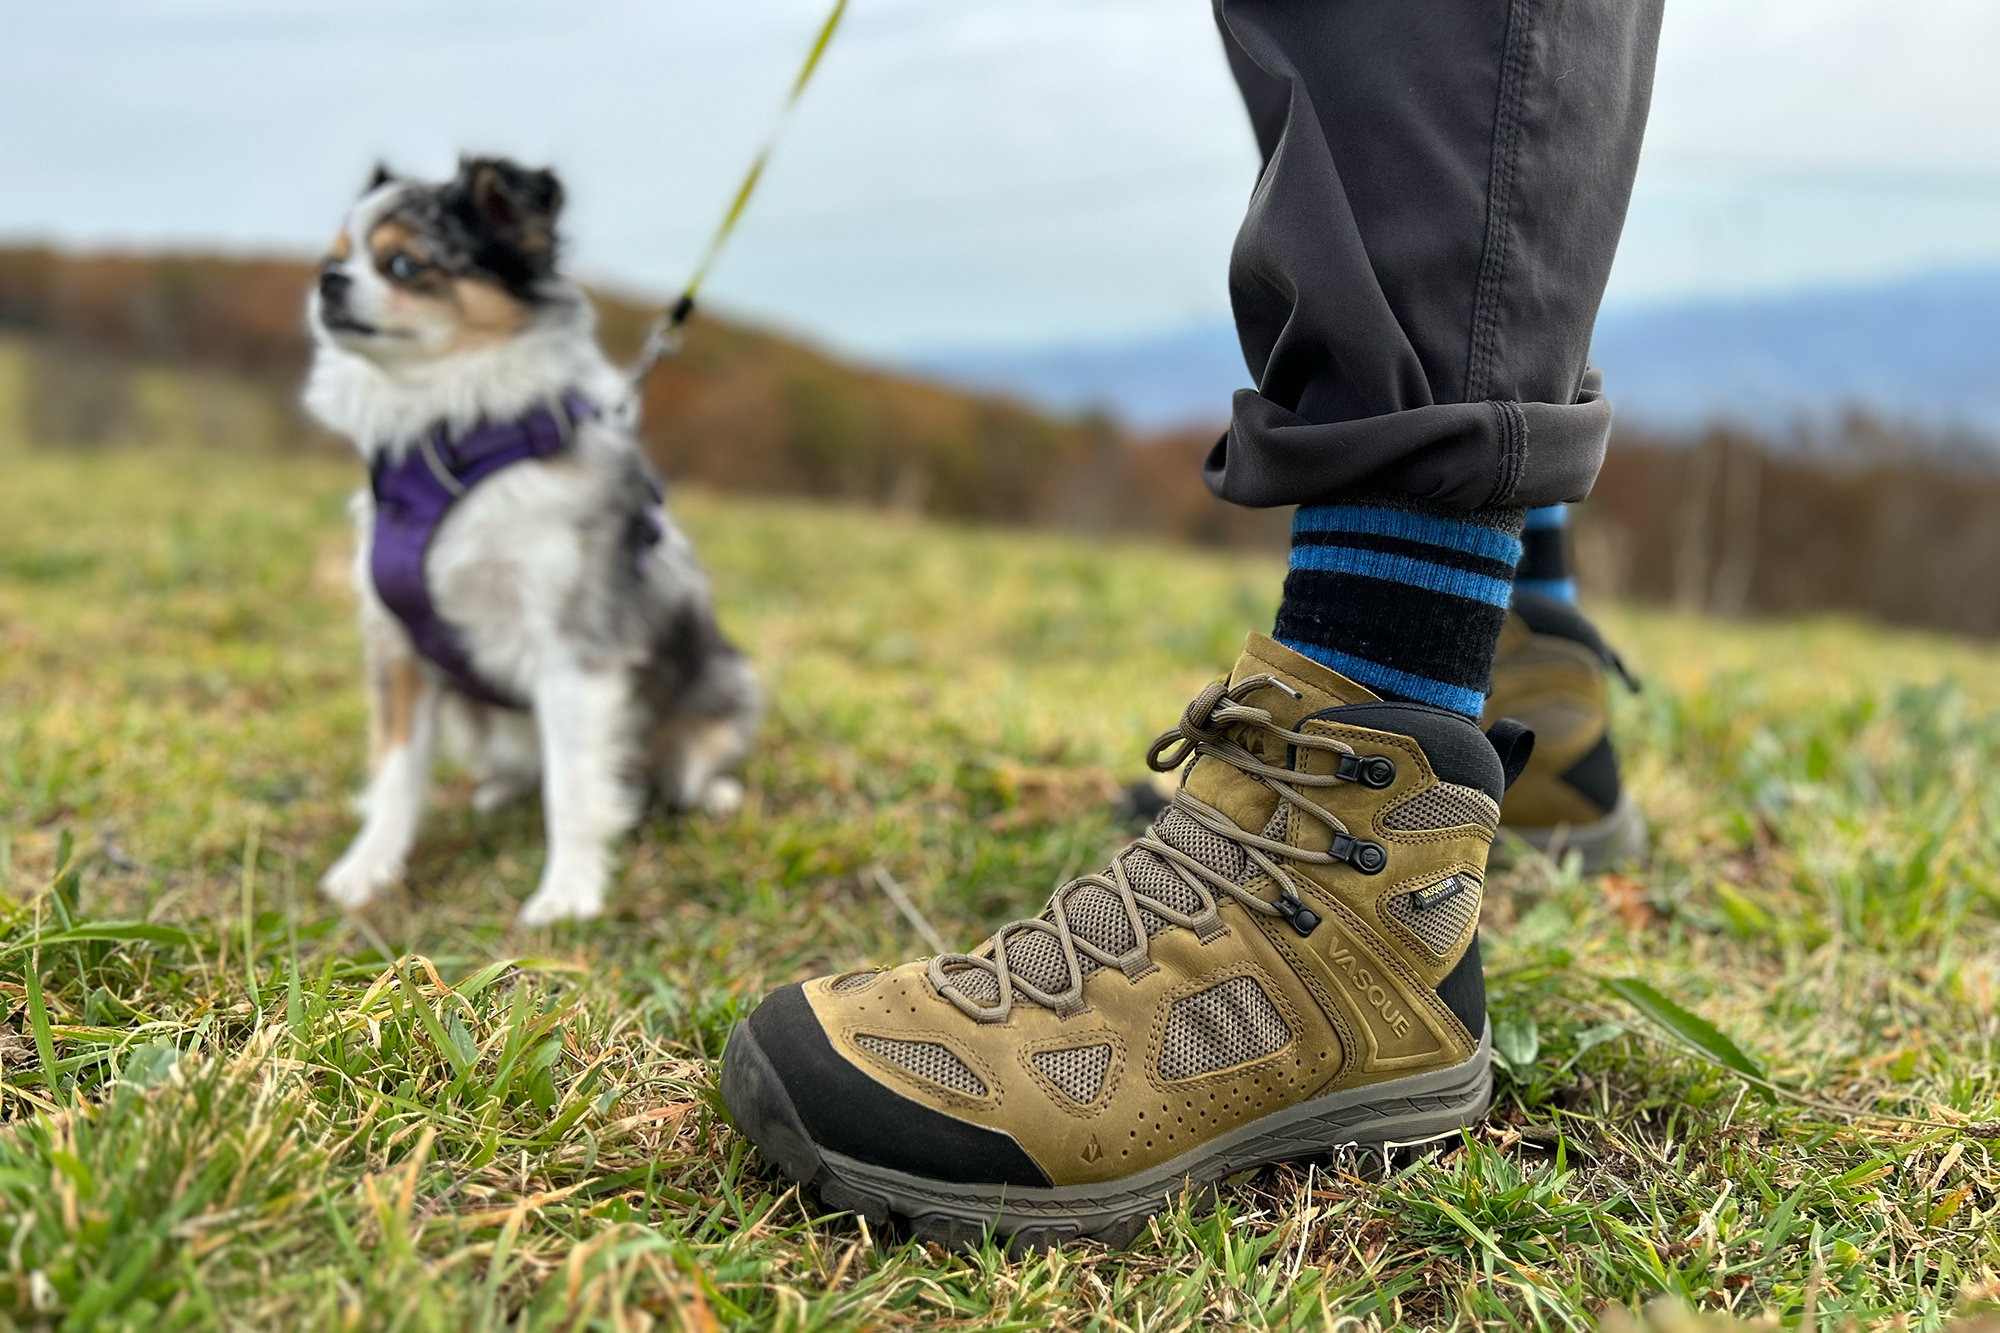 Vasque Men's Breeze waterproof hiking boots on the trail with the bestest dog